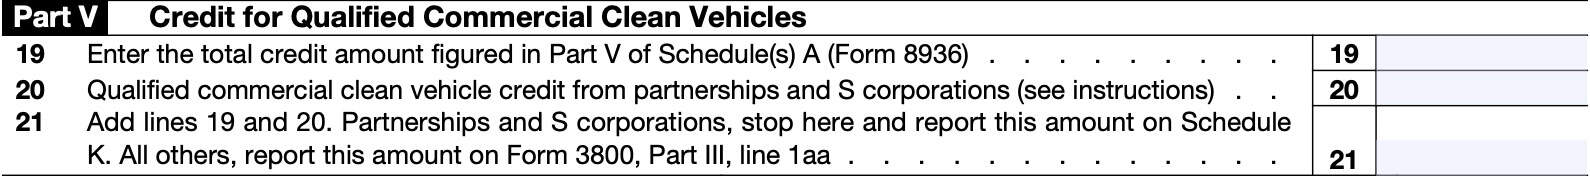 irs form 8936 part v, credit for qualified commercial clean vehicles